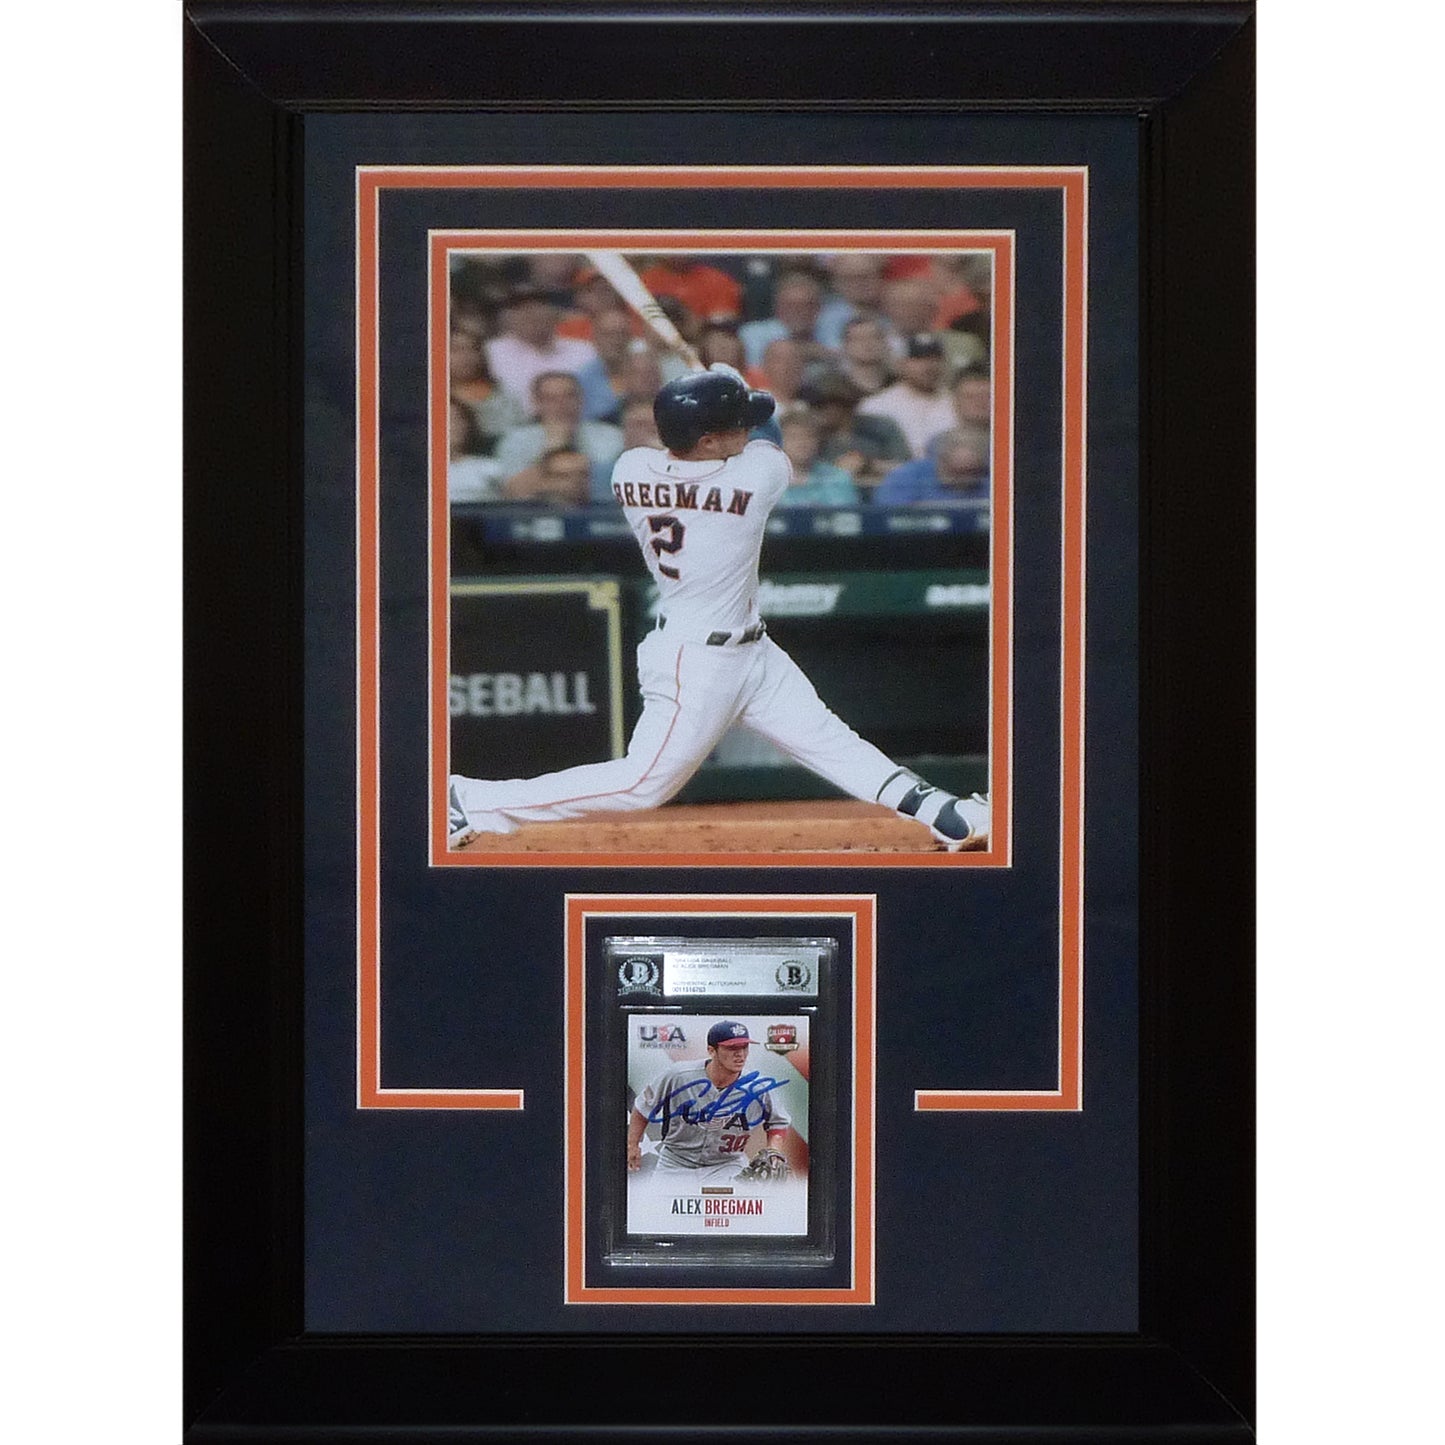 Alex Bregman Autographed Baseball Card Deluxe Framed with Houston Astros 8x10 Photo - Beckett